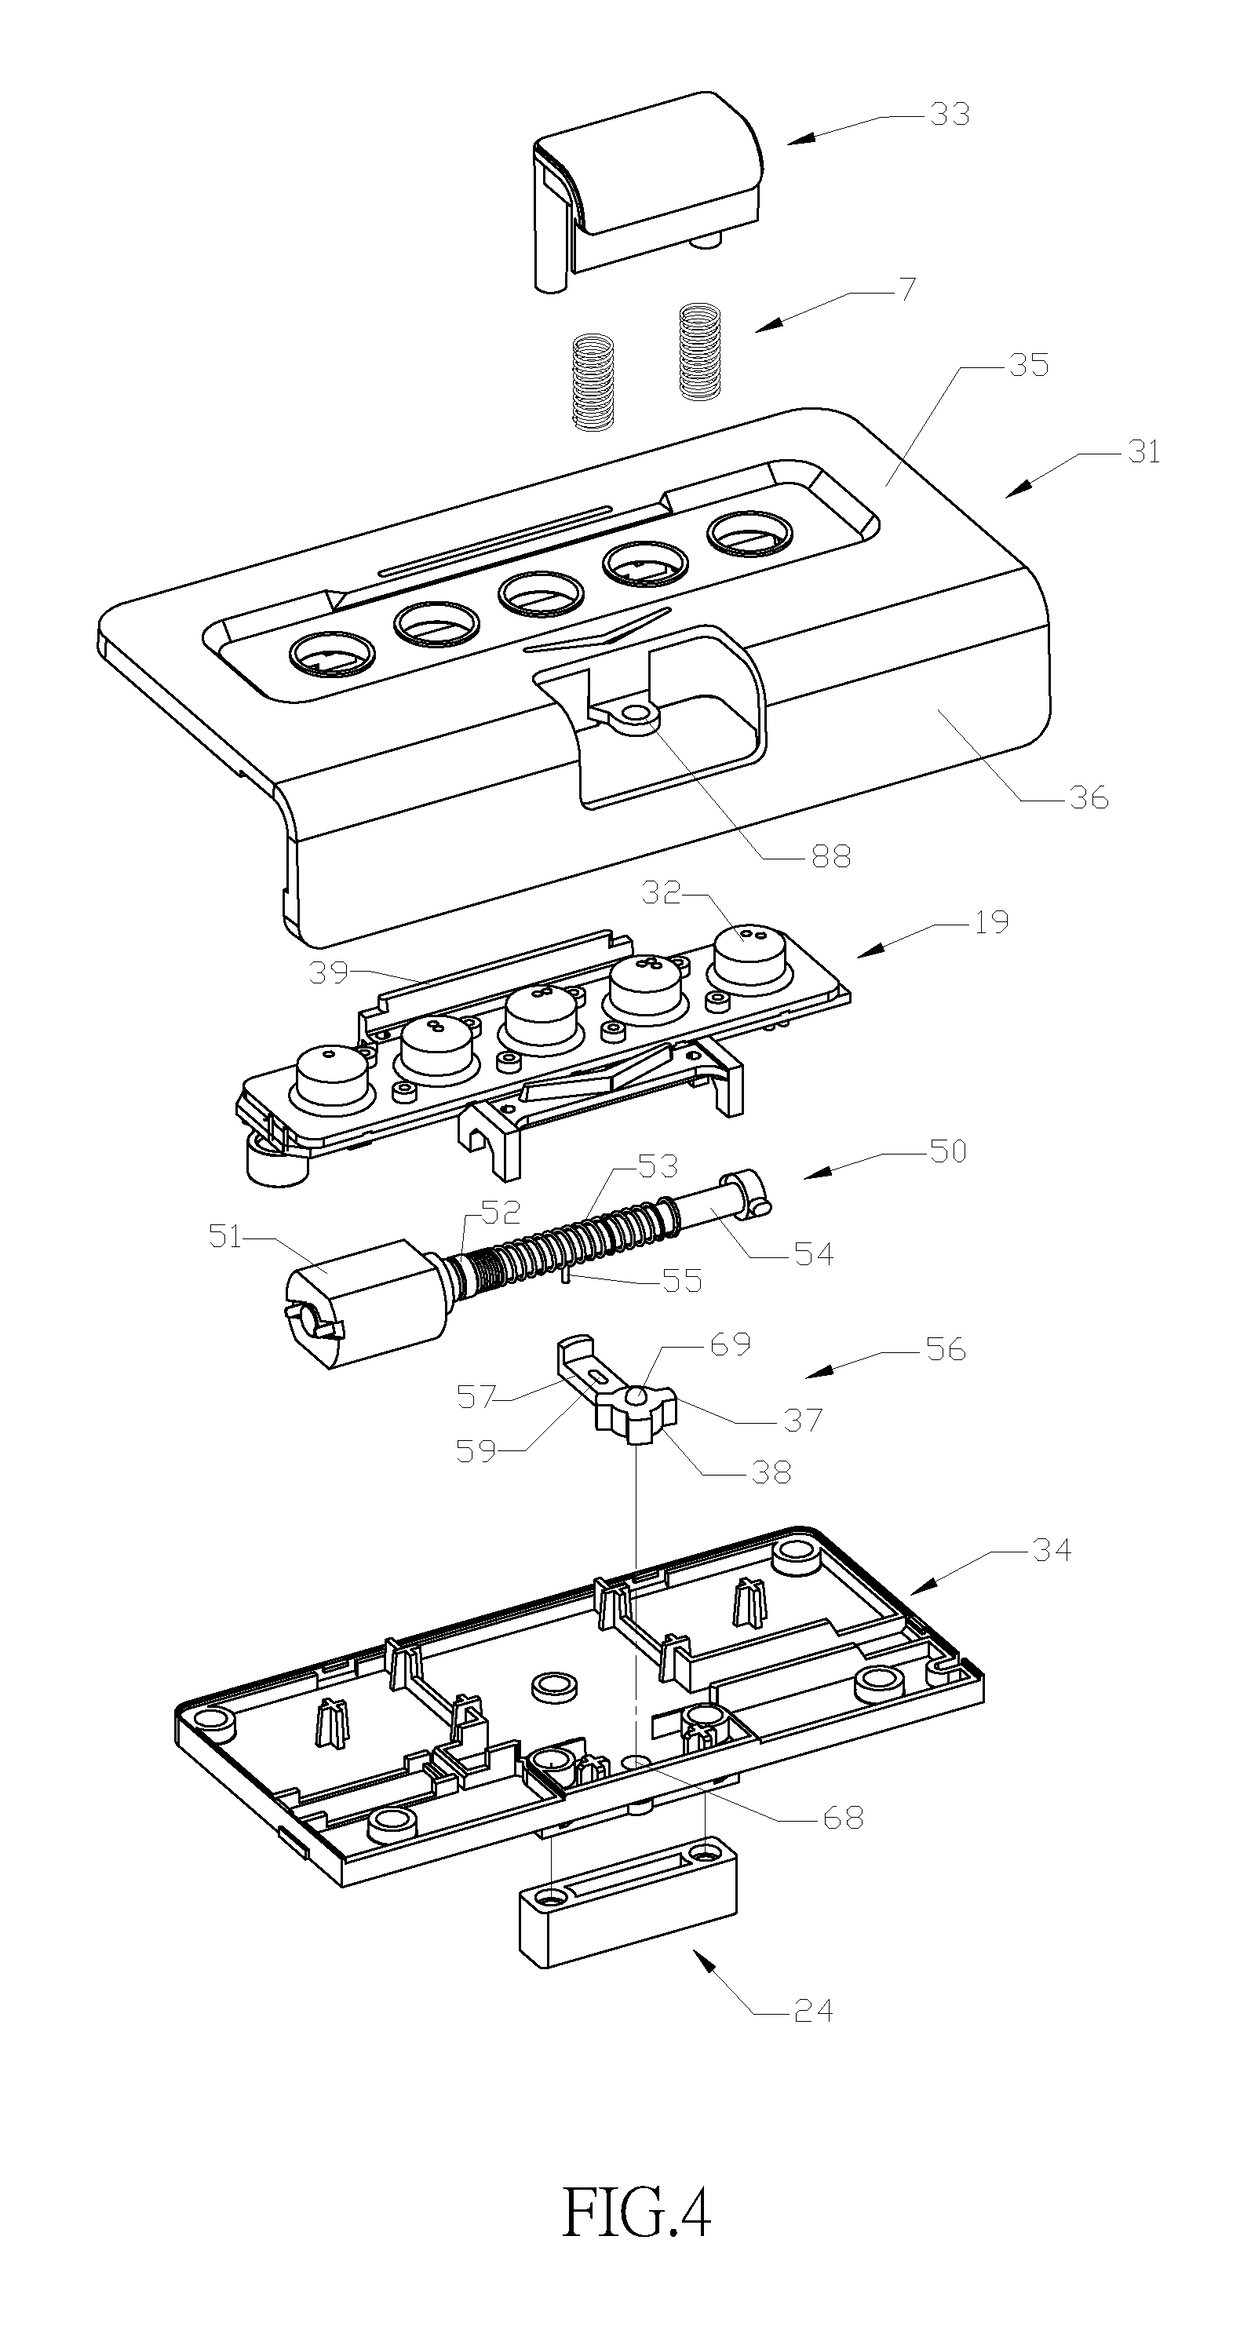 Portable suitcase with electronic combination locking device